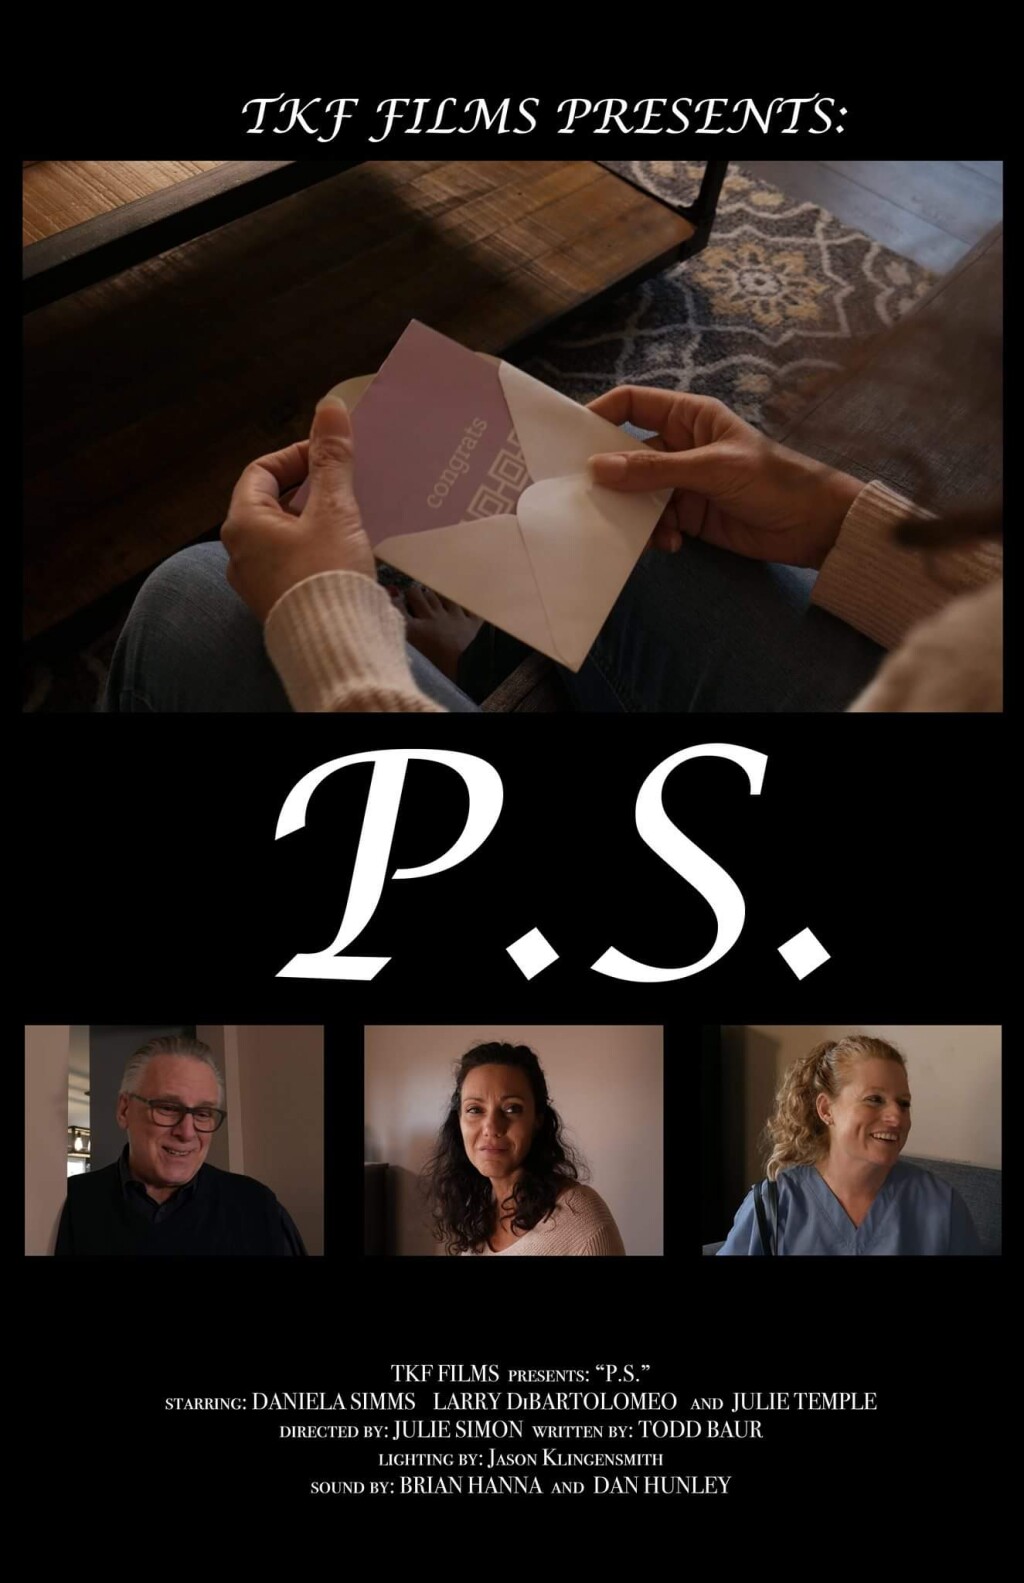 Filmposter for P.S.